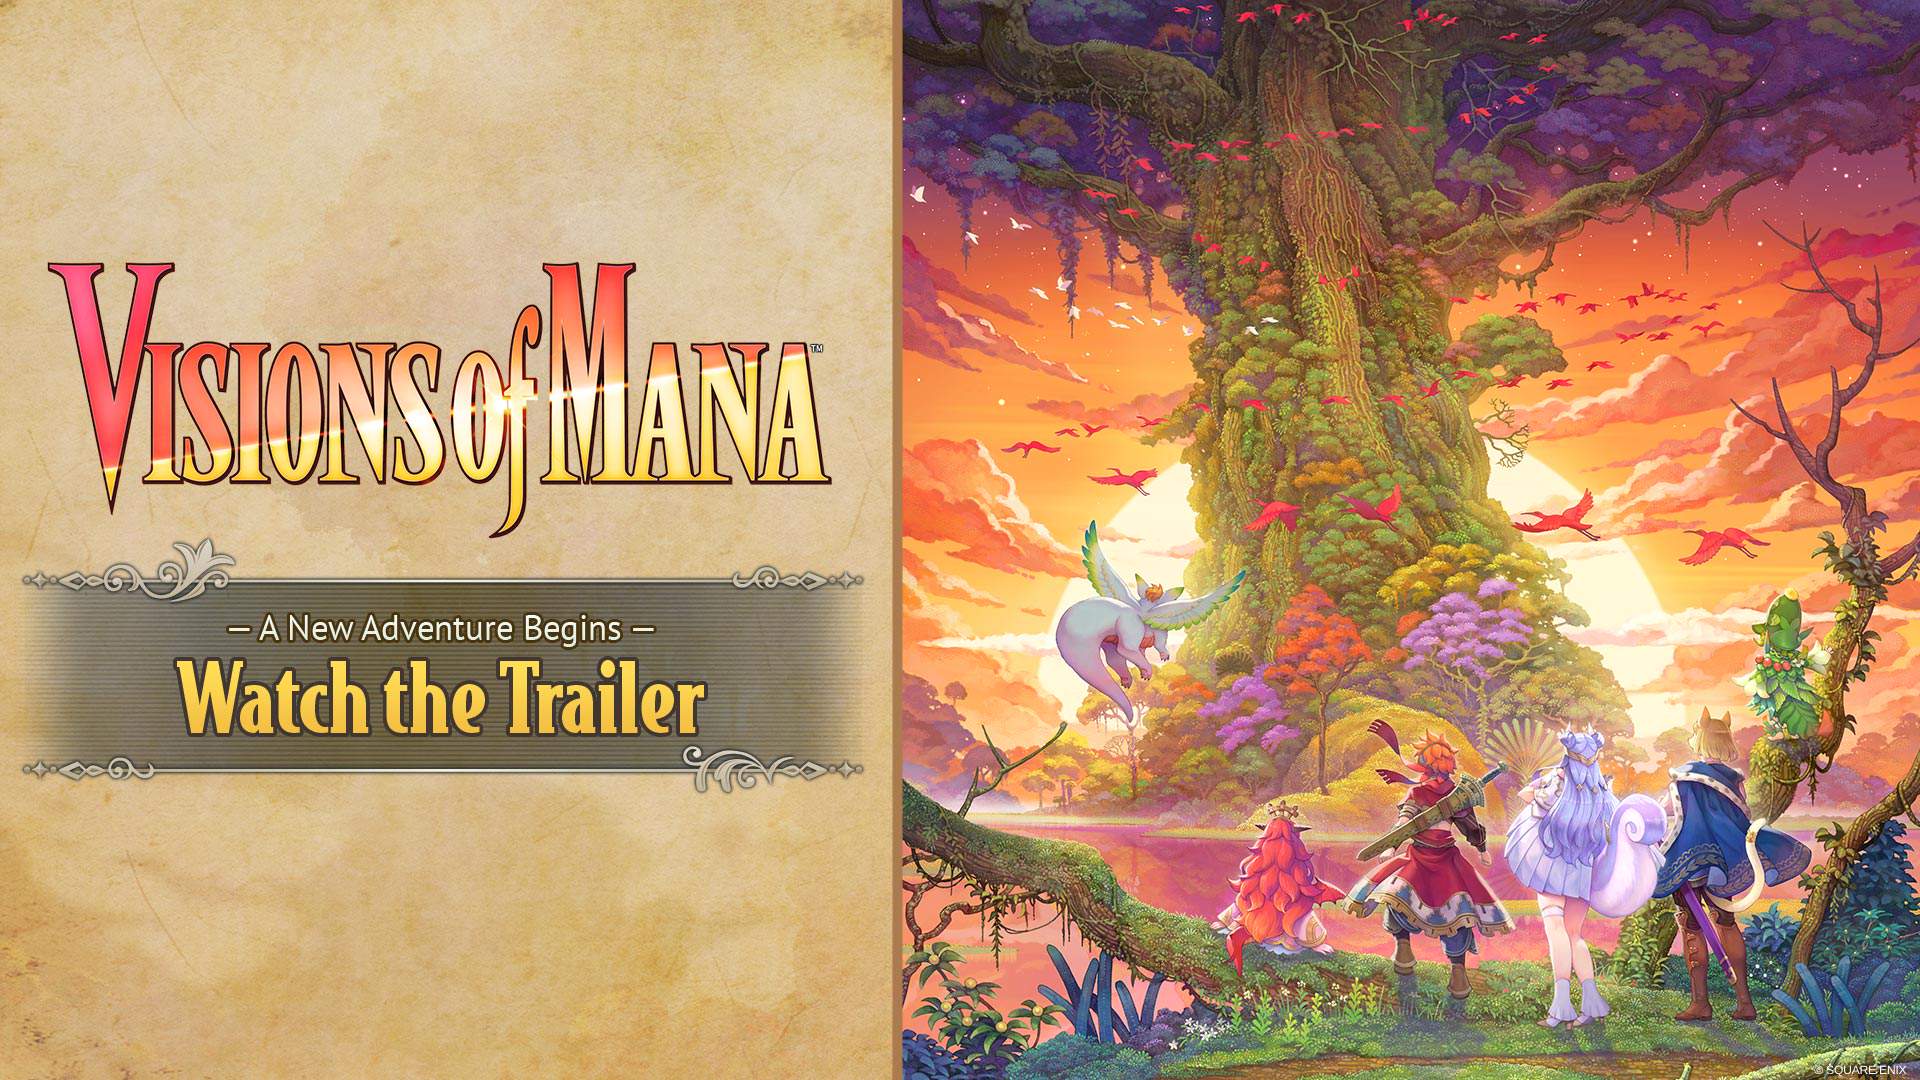 Key art for Visions of Mana including the logo and "watch the trailer" text.